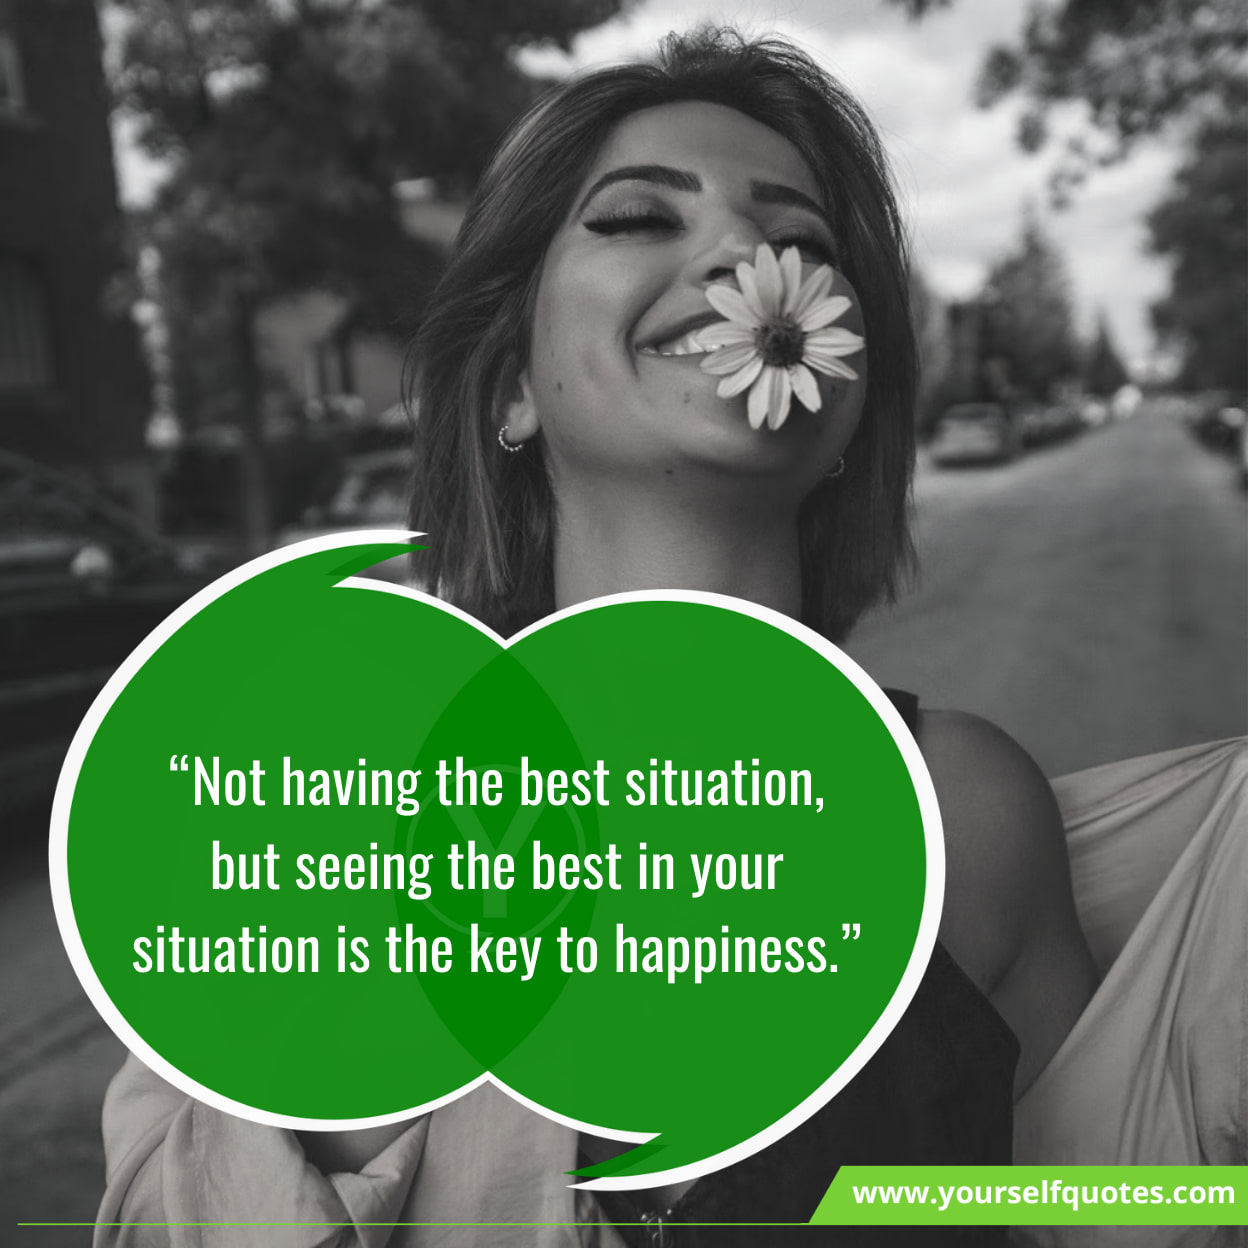 Uplifting Quotes On Life & Happiness